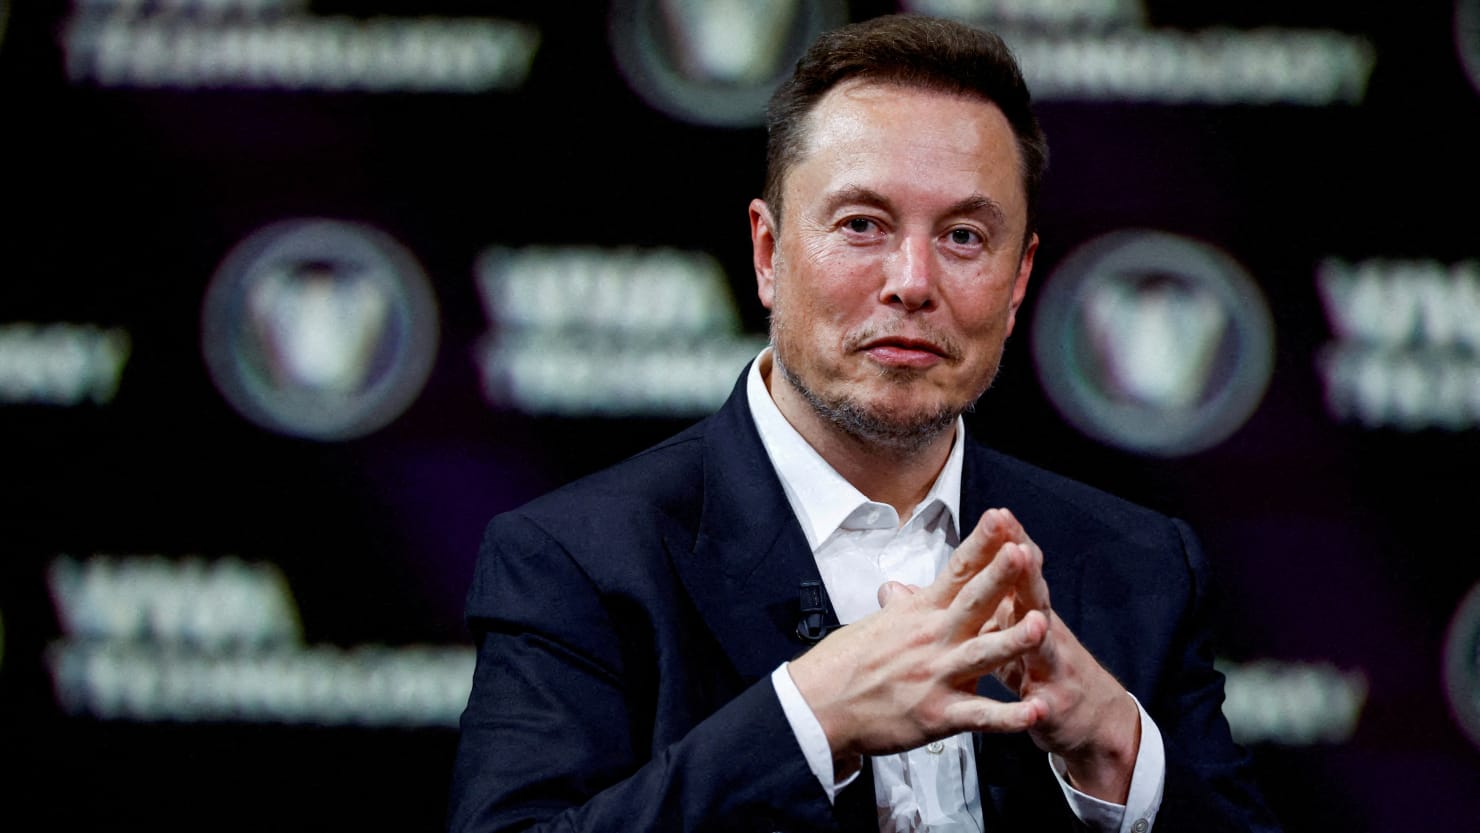 Wwwwxxxx 16 - Elon Musk's Twitter Rebrand as 'X' Gets Site Blocked Under Indonesia Porn  Laws